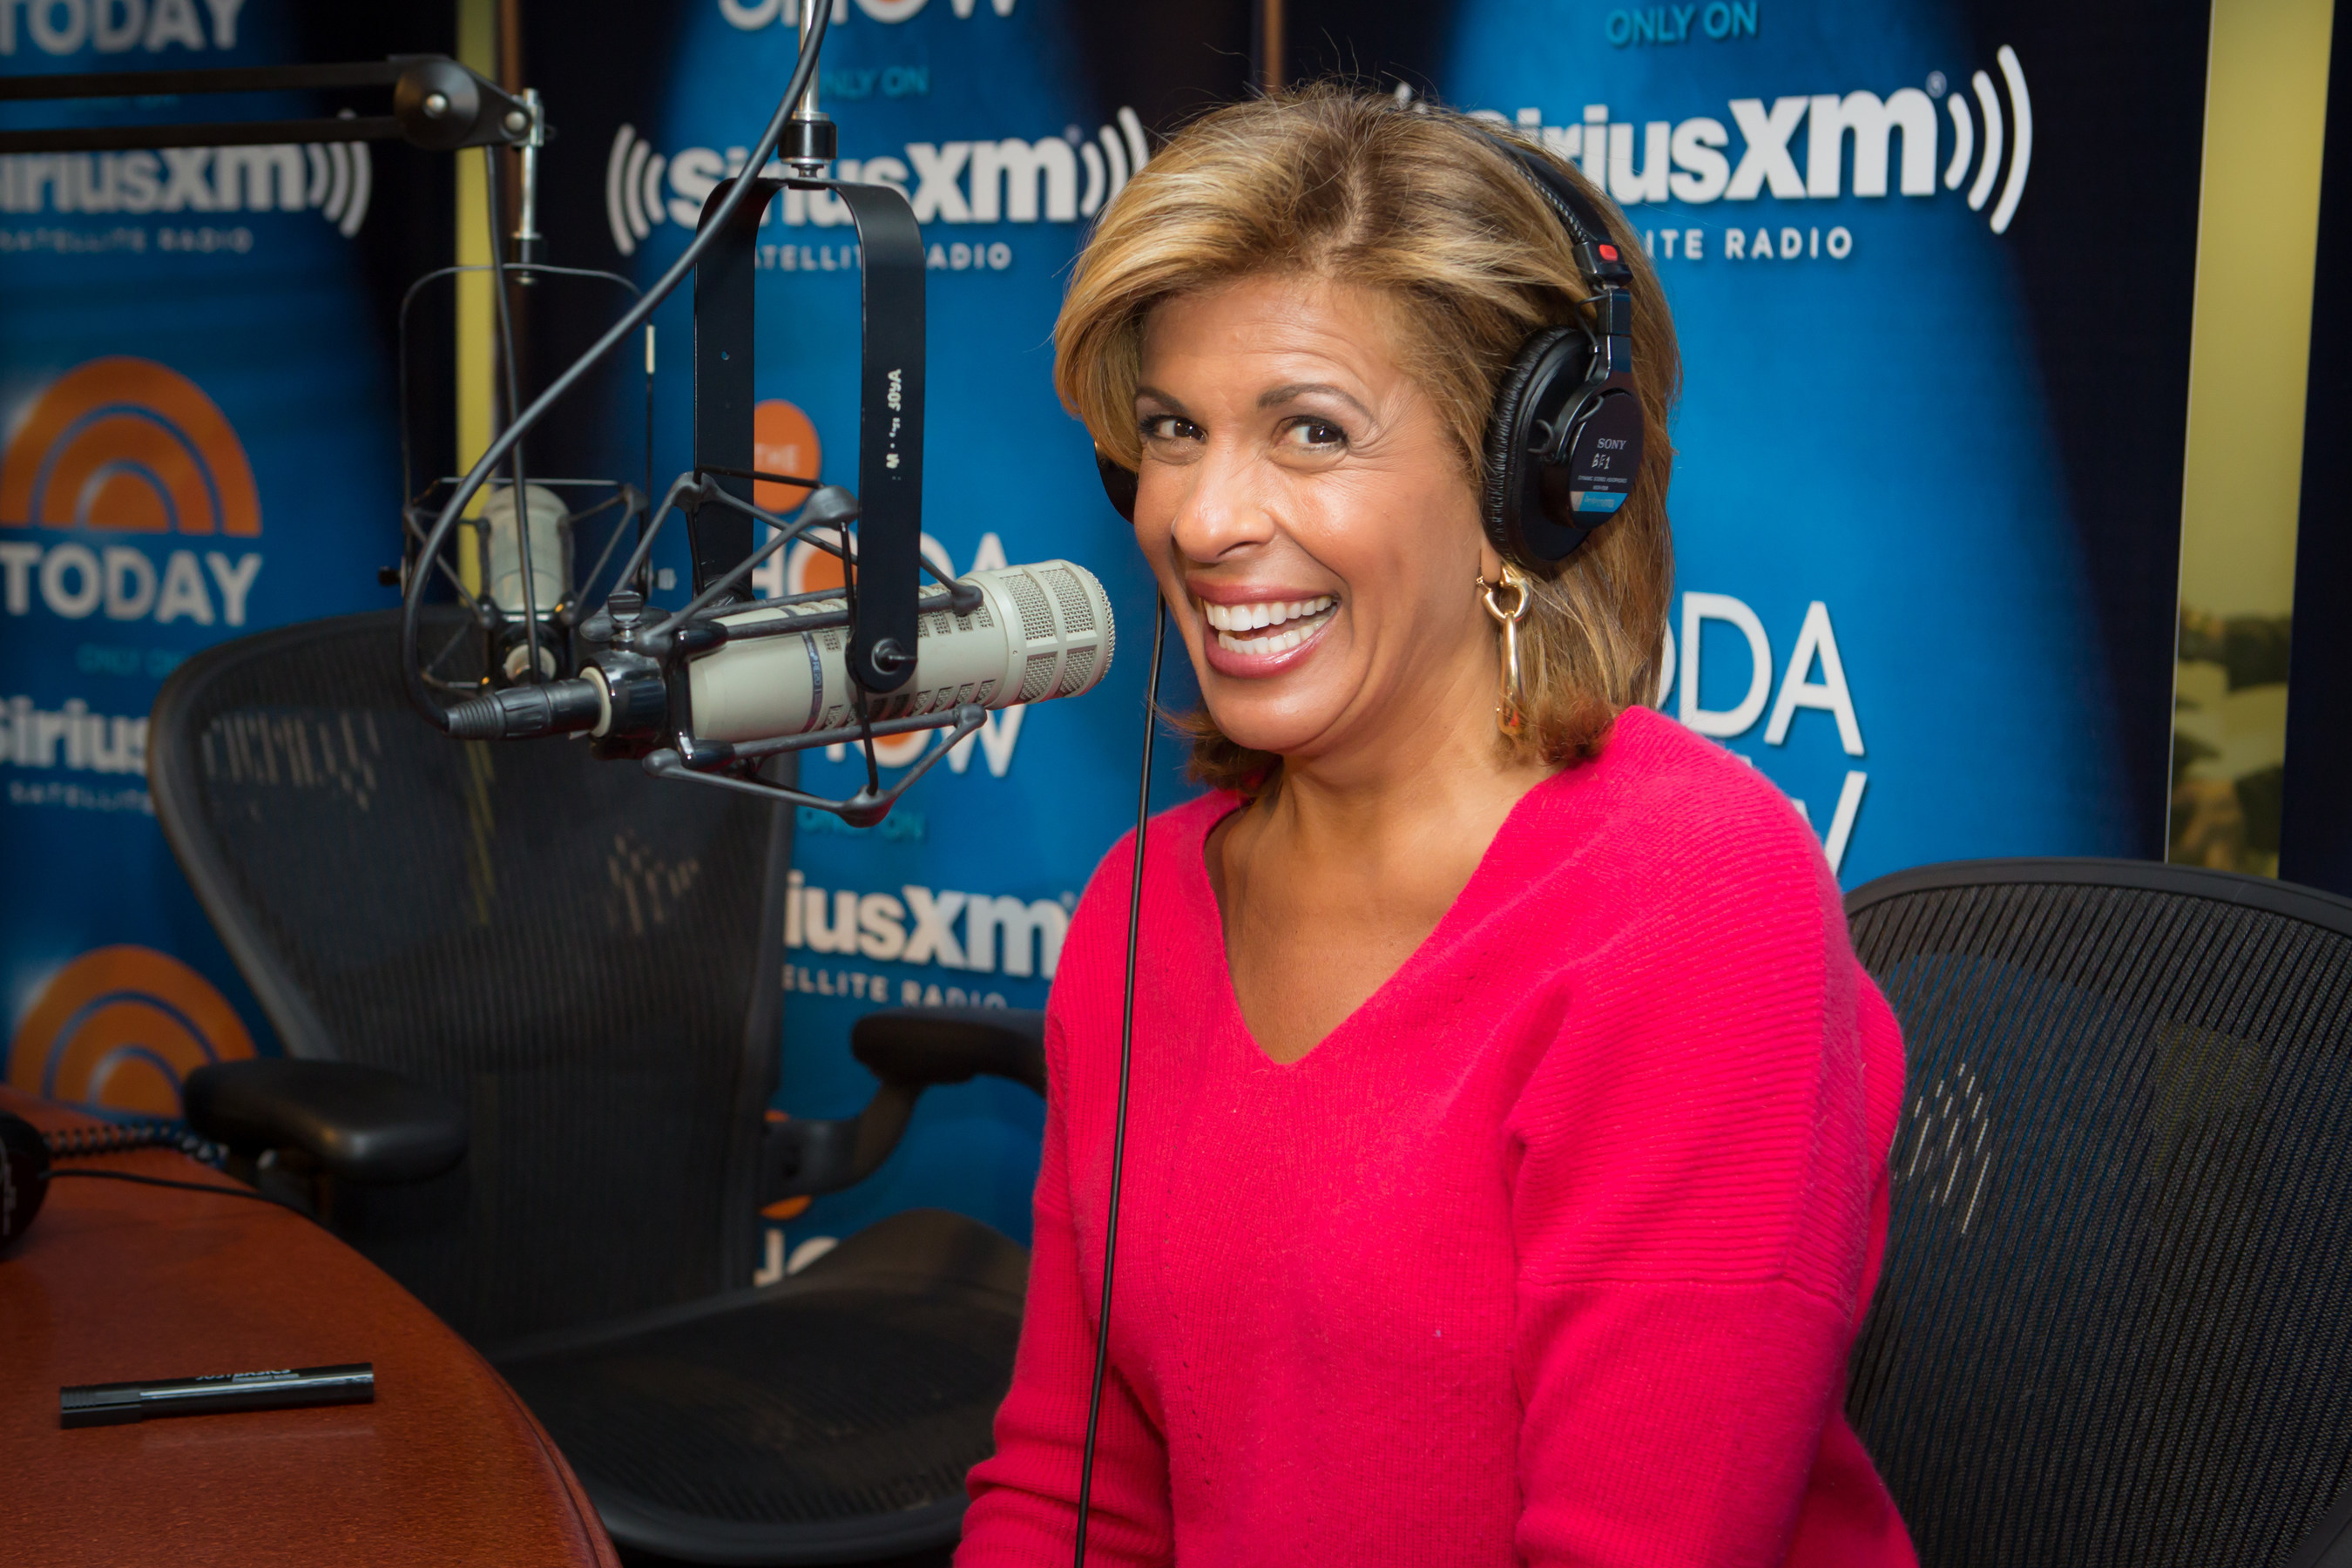 Hoda Kotb to Launch Her New Exclusive Live SiriusXM Show 'The Hoda Show' on February 23.